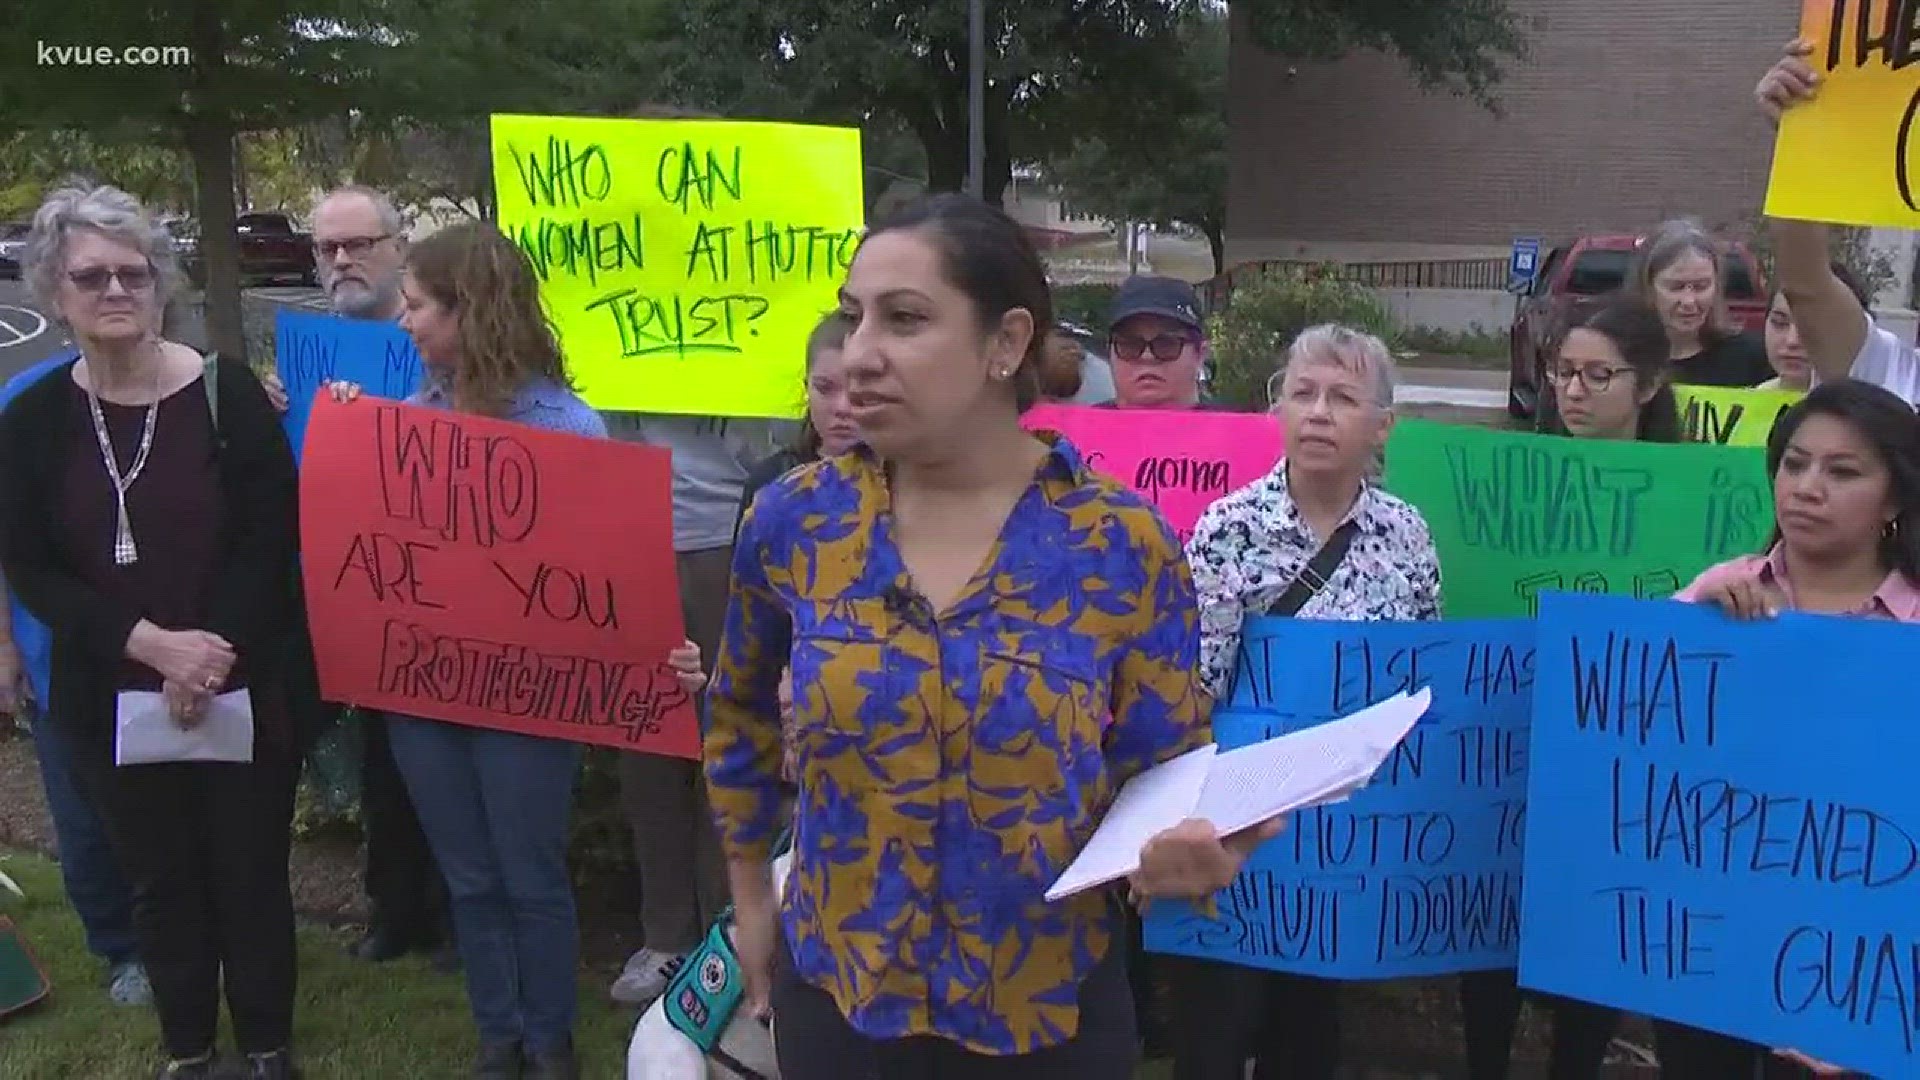 Members of the the immigrant advocacy group Grassroots Leadership are demanding answers.